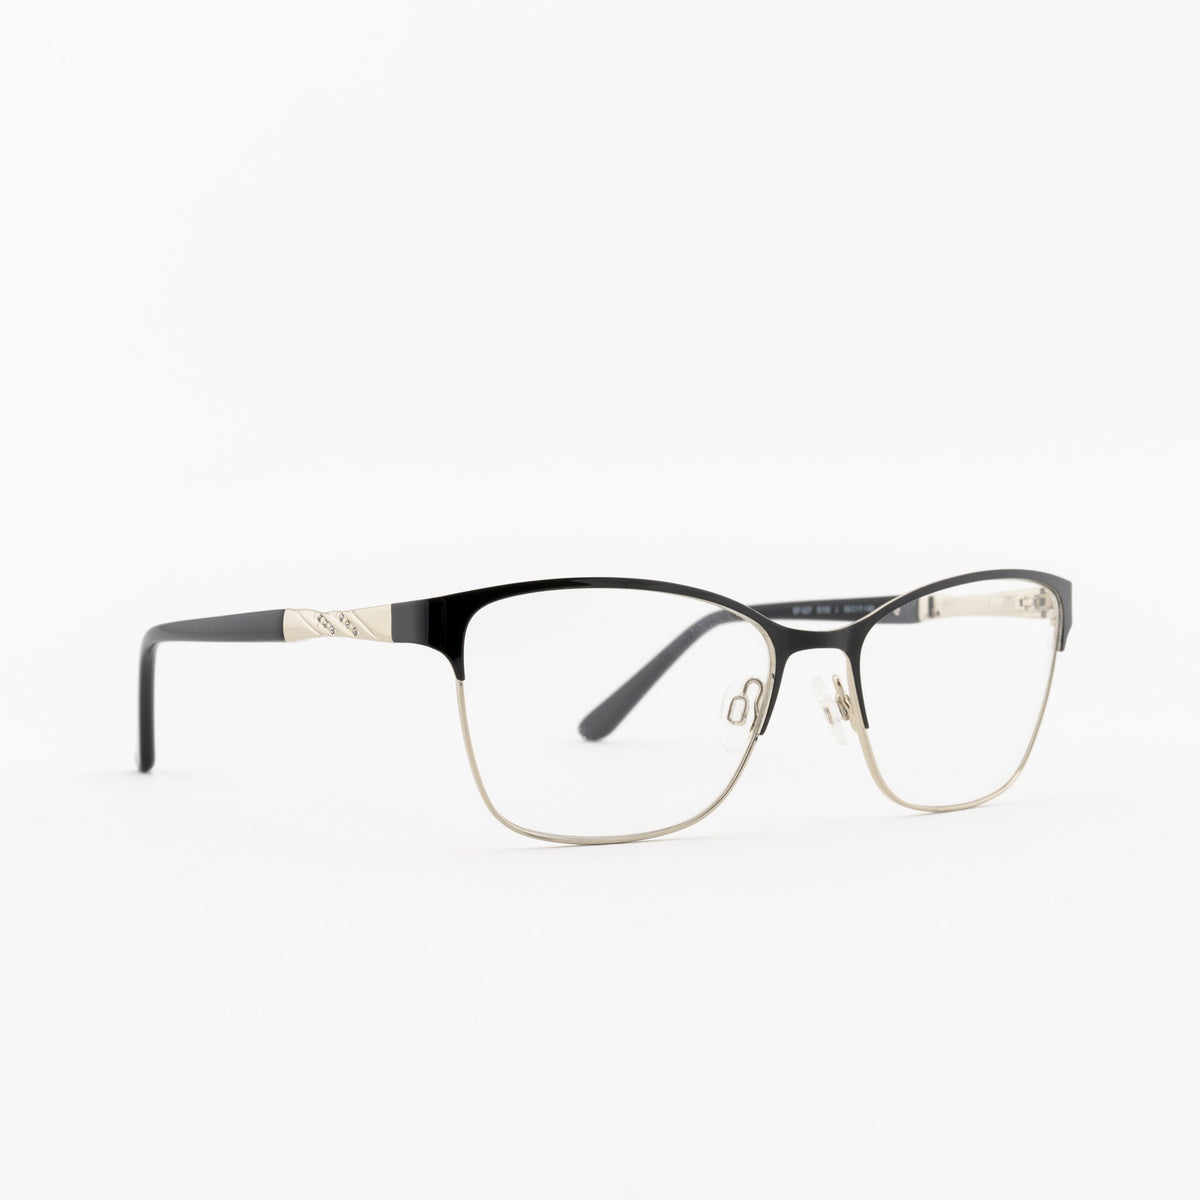 SF-537 Frames Superflex 55 S100 - BLACK SILVER Not Available